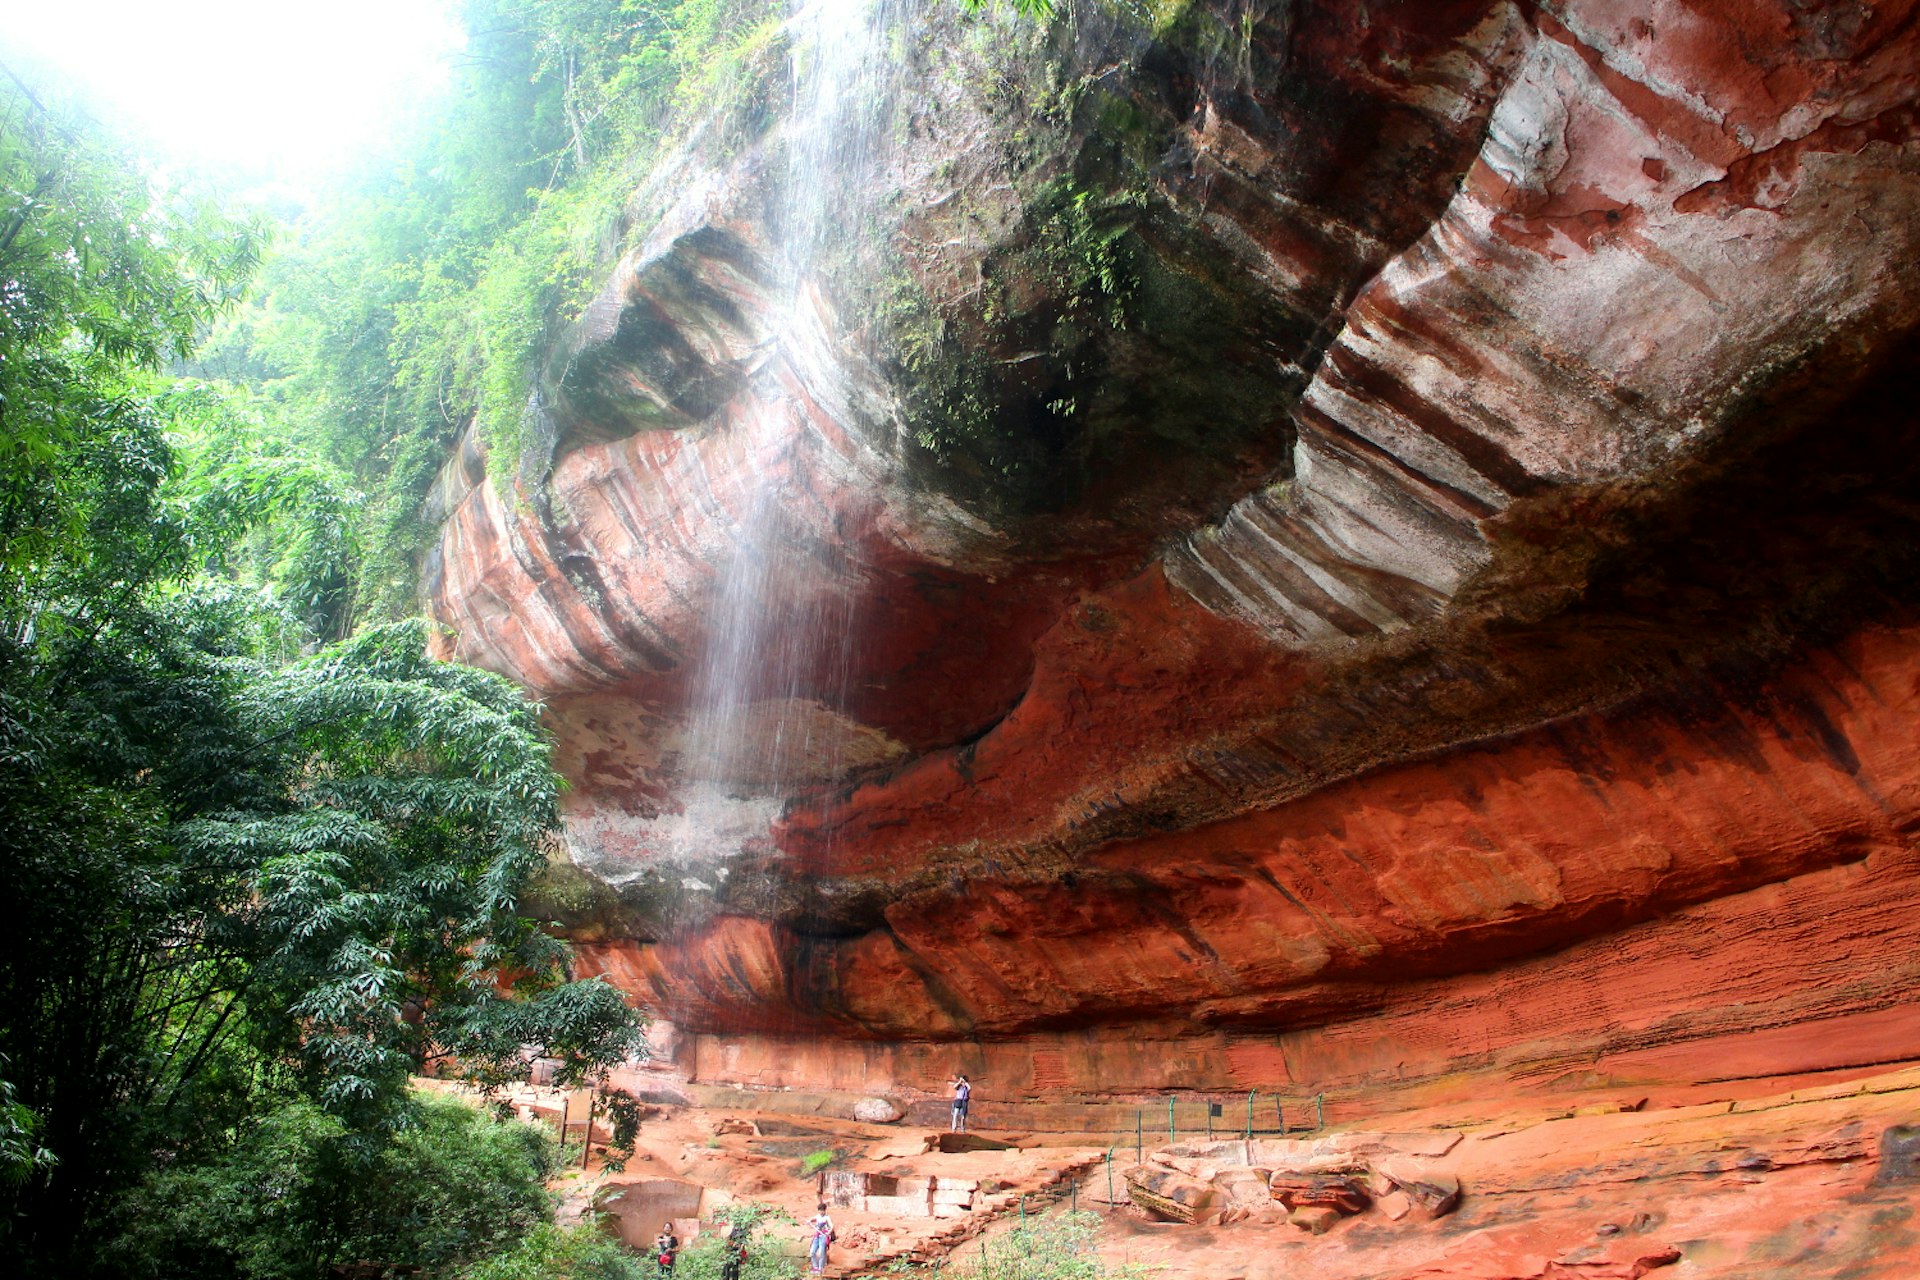 Red river runs through it: Chishui's iconic red clay waterfalls. Image by Thomas Bird / Lonely Planet